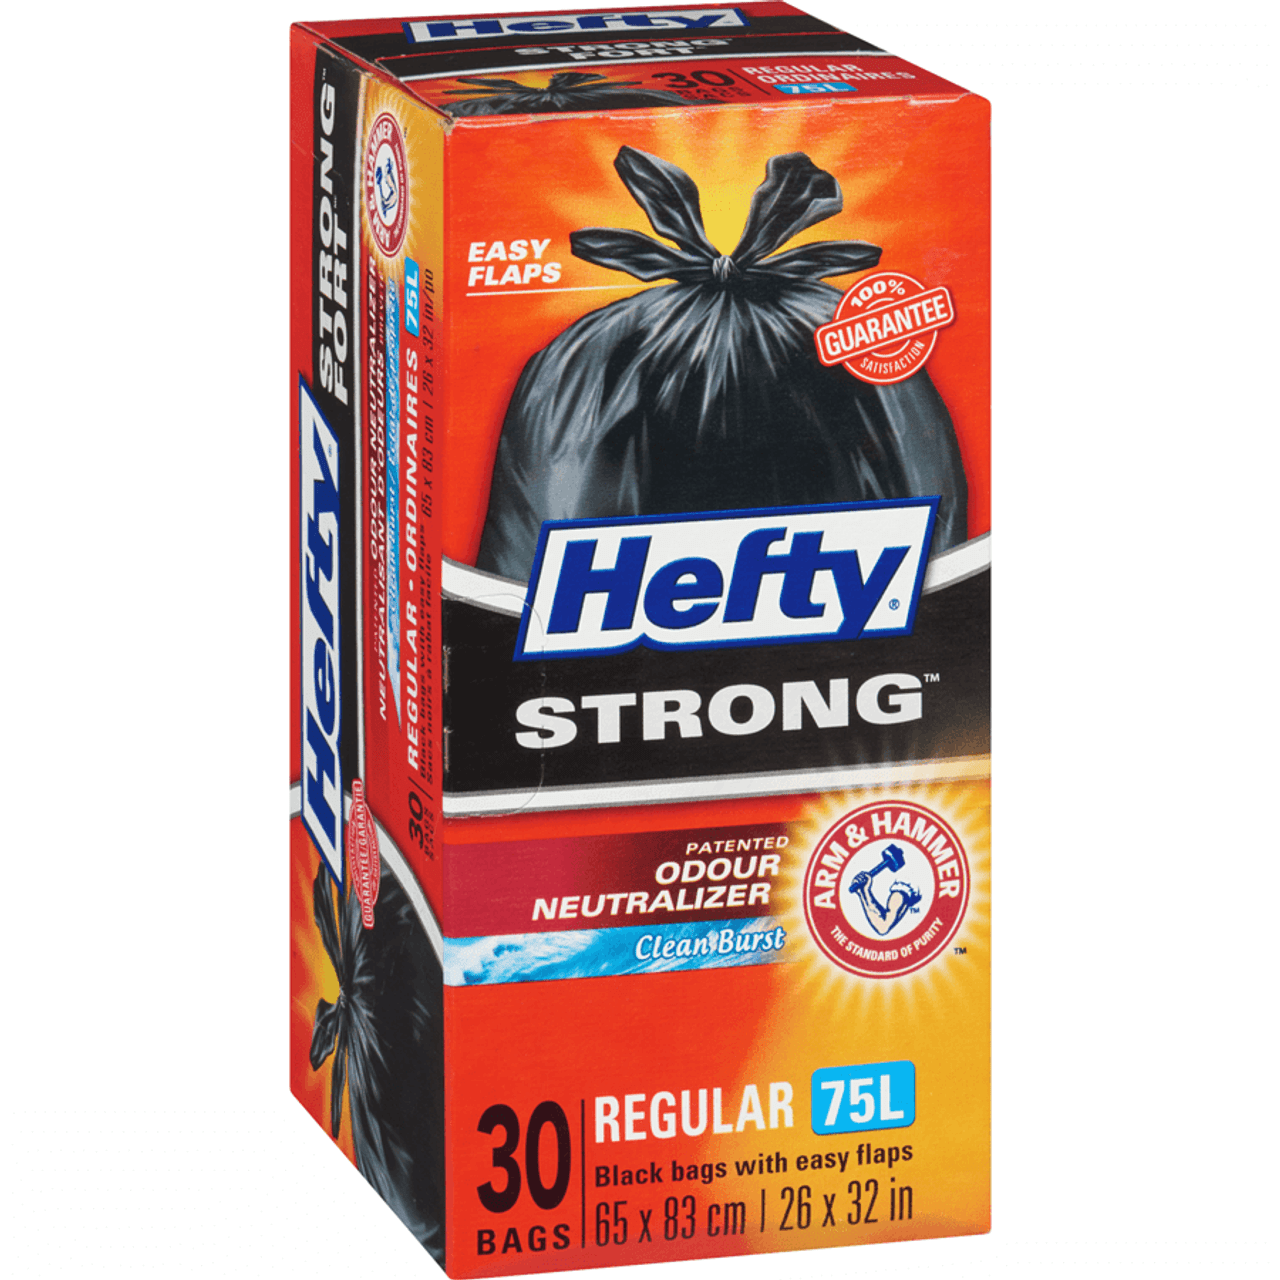 HEFTY Strong Regular Easy Flaps Garbage Bags 75 Litres, 30 Bags(8/Case)-Chicken Pieces